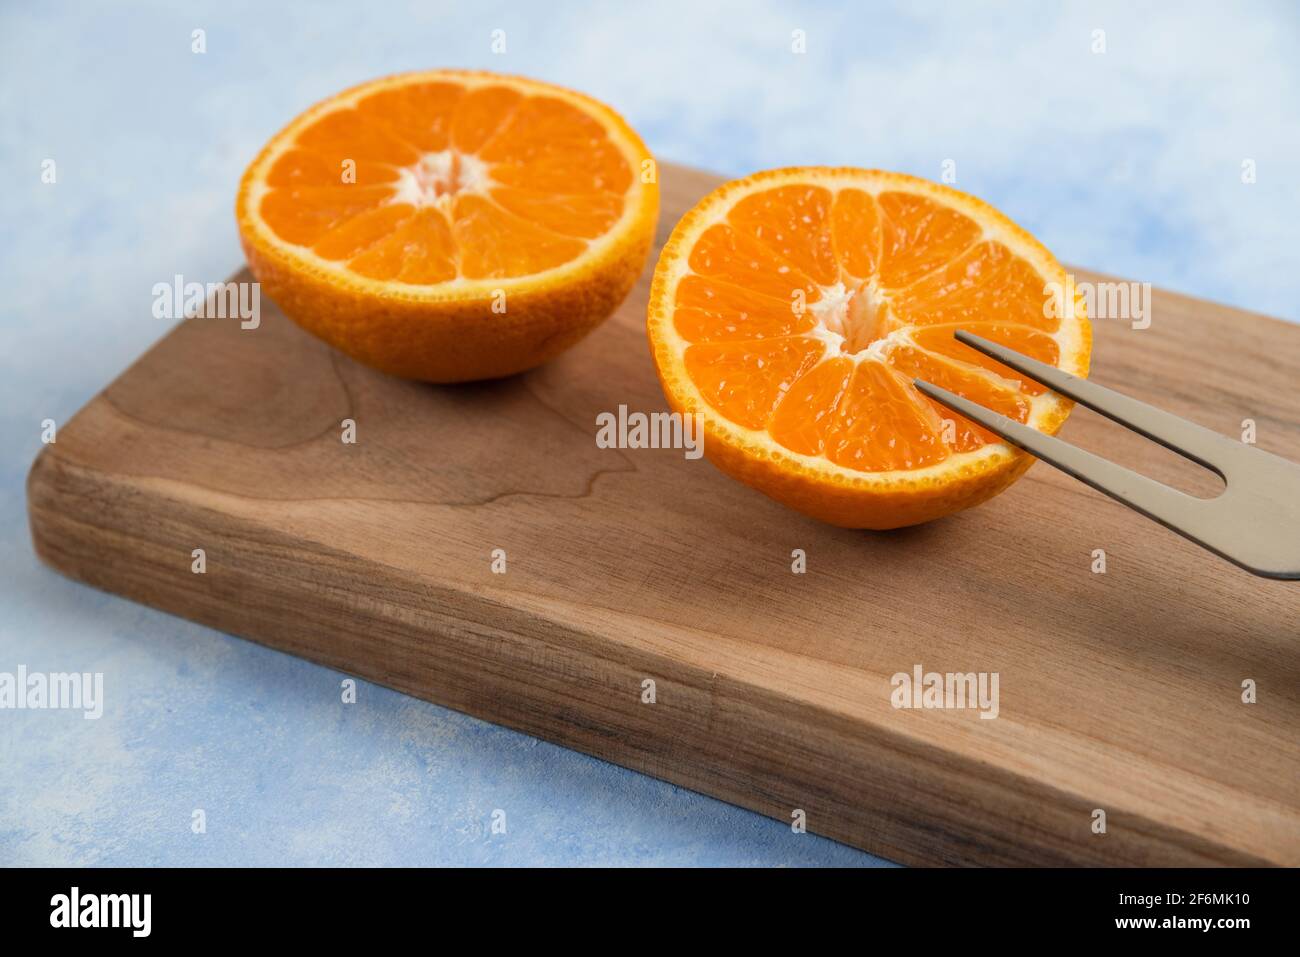 Close up photo of half cut clementine mandarin on wooden board Stock Photo